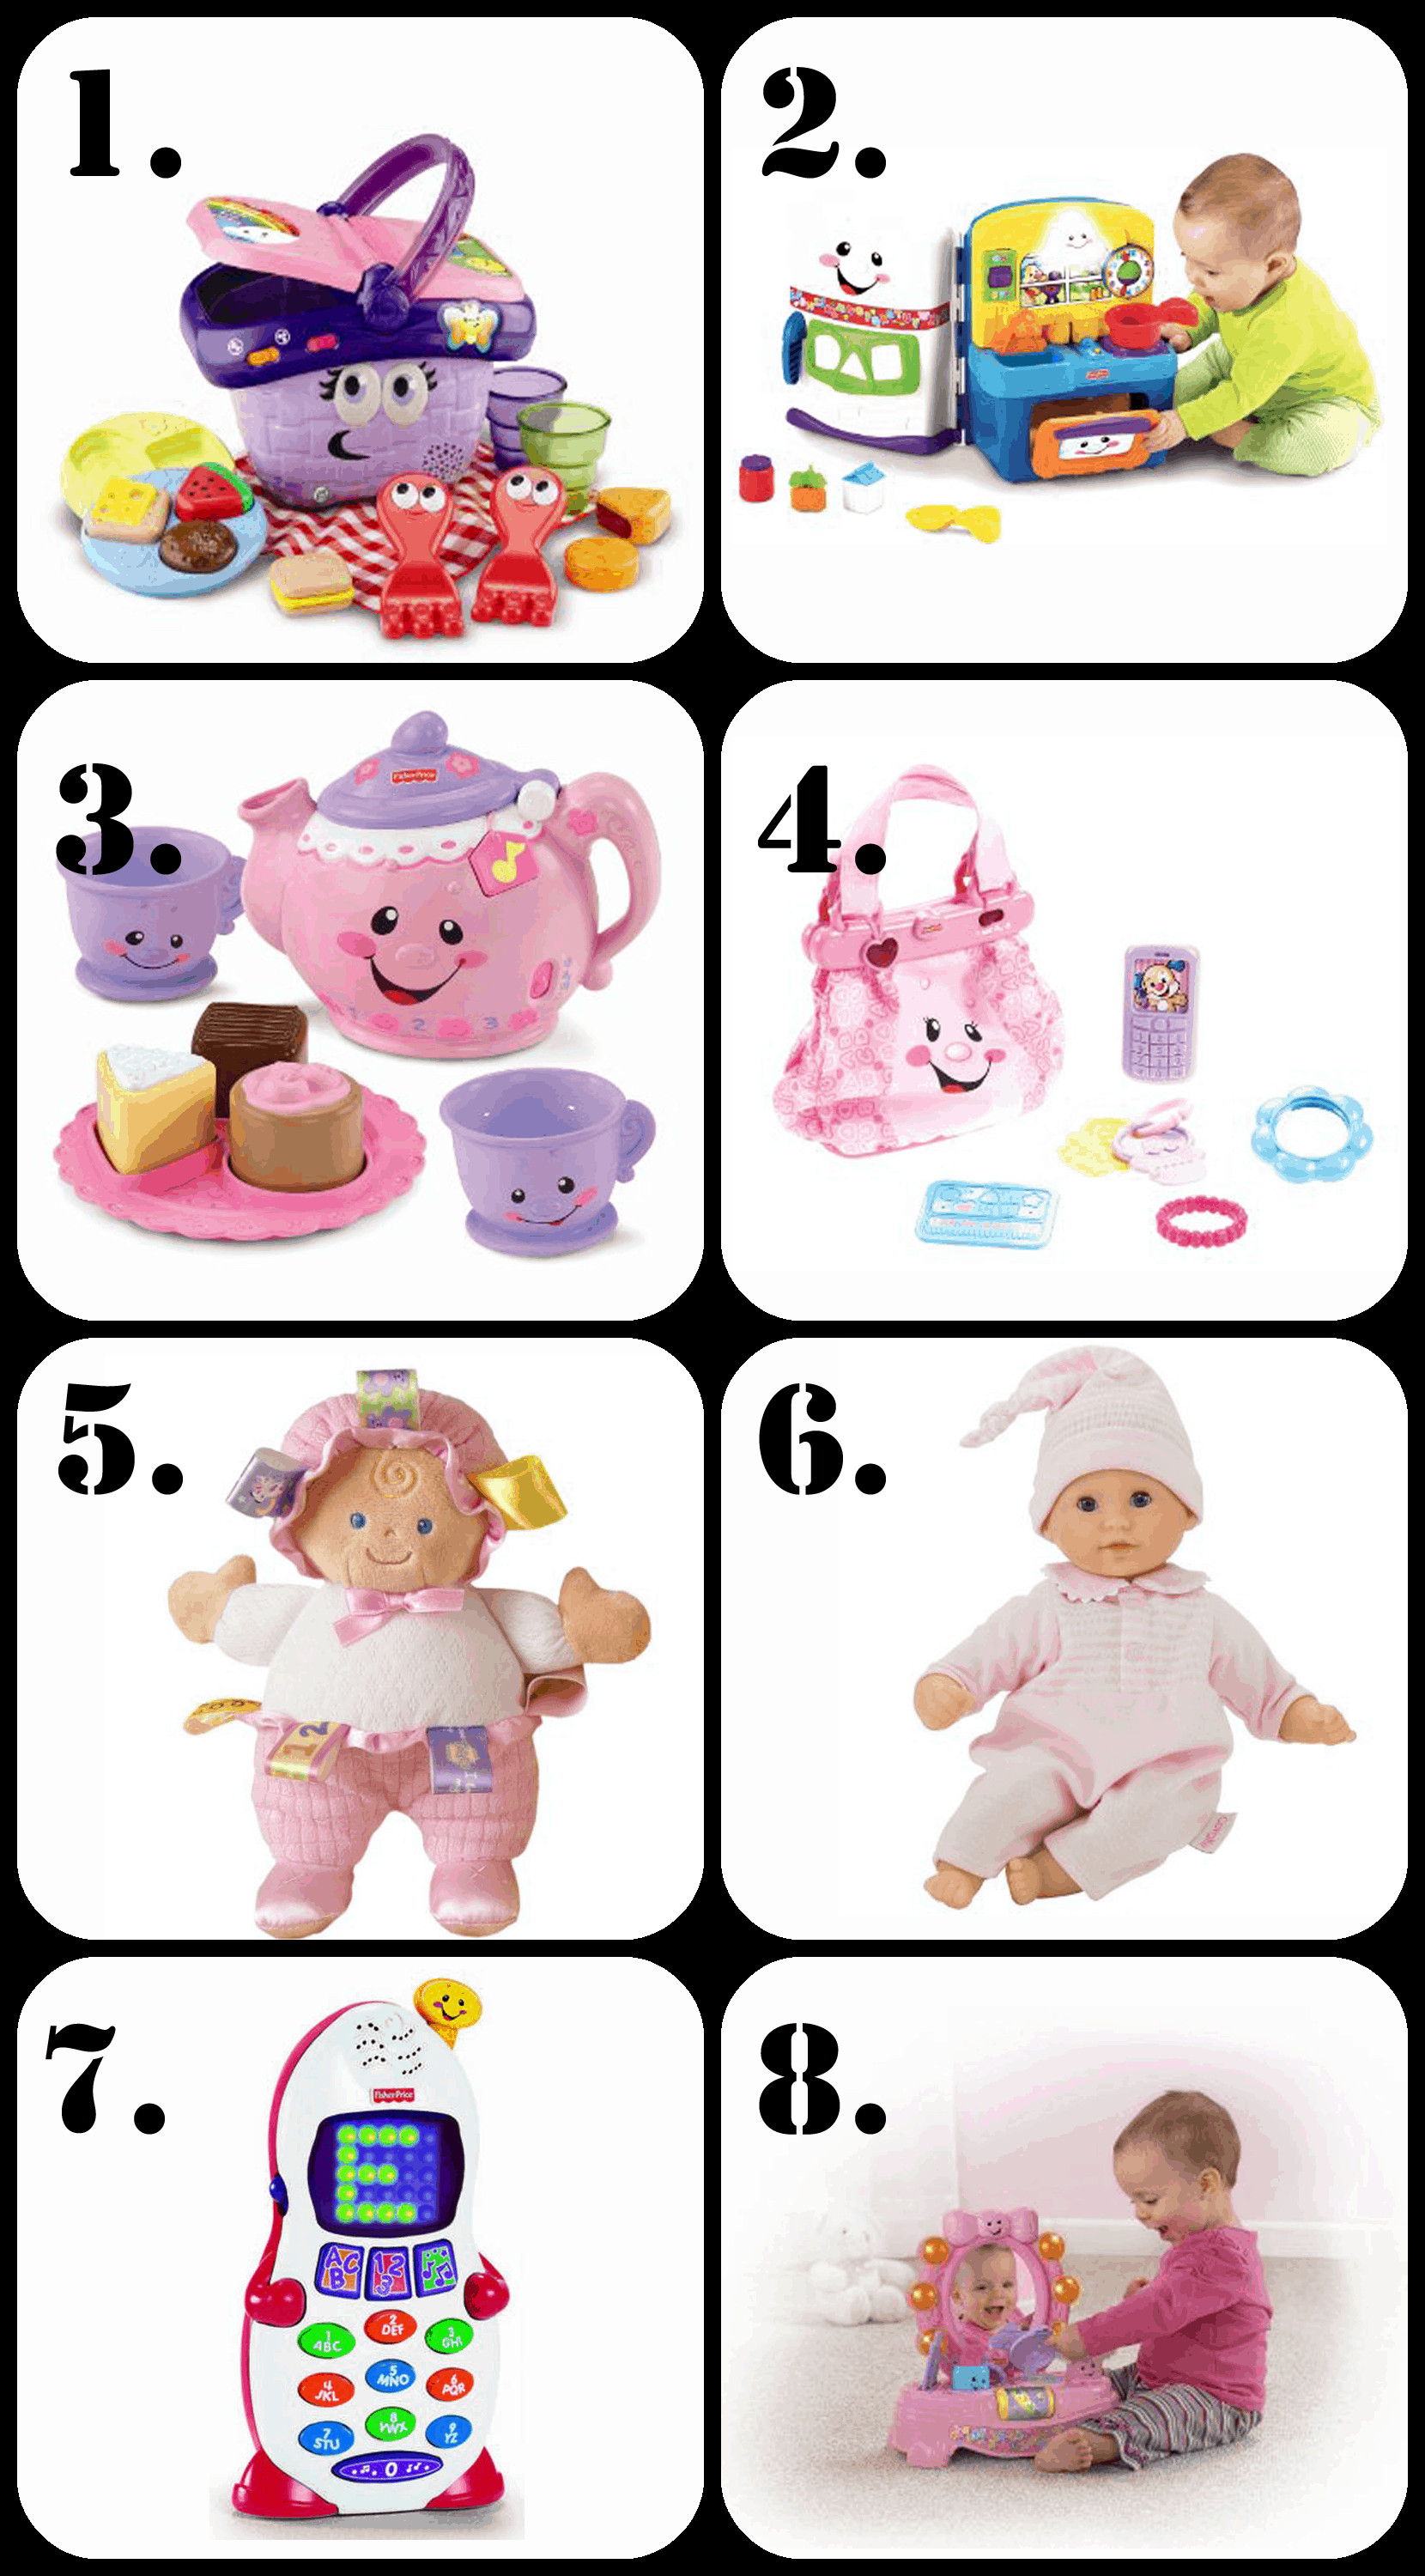 1 Year Old Baby Gift Ideas
 The Ultimate List of Gift Ideas for a 1 Year Old Girl